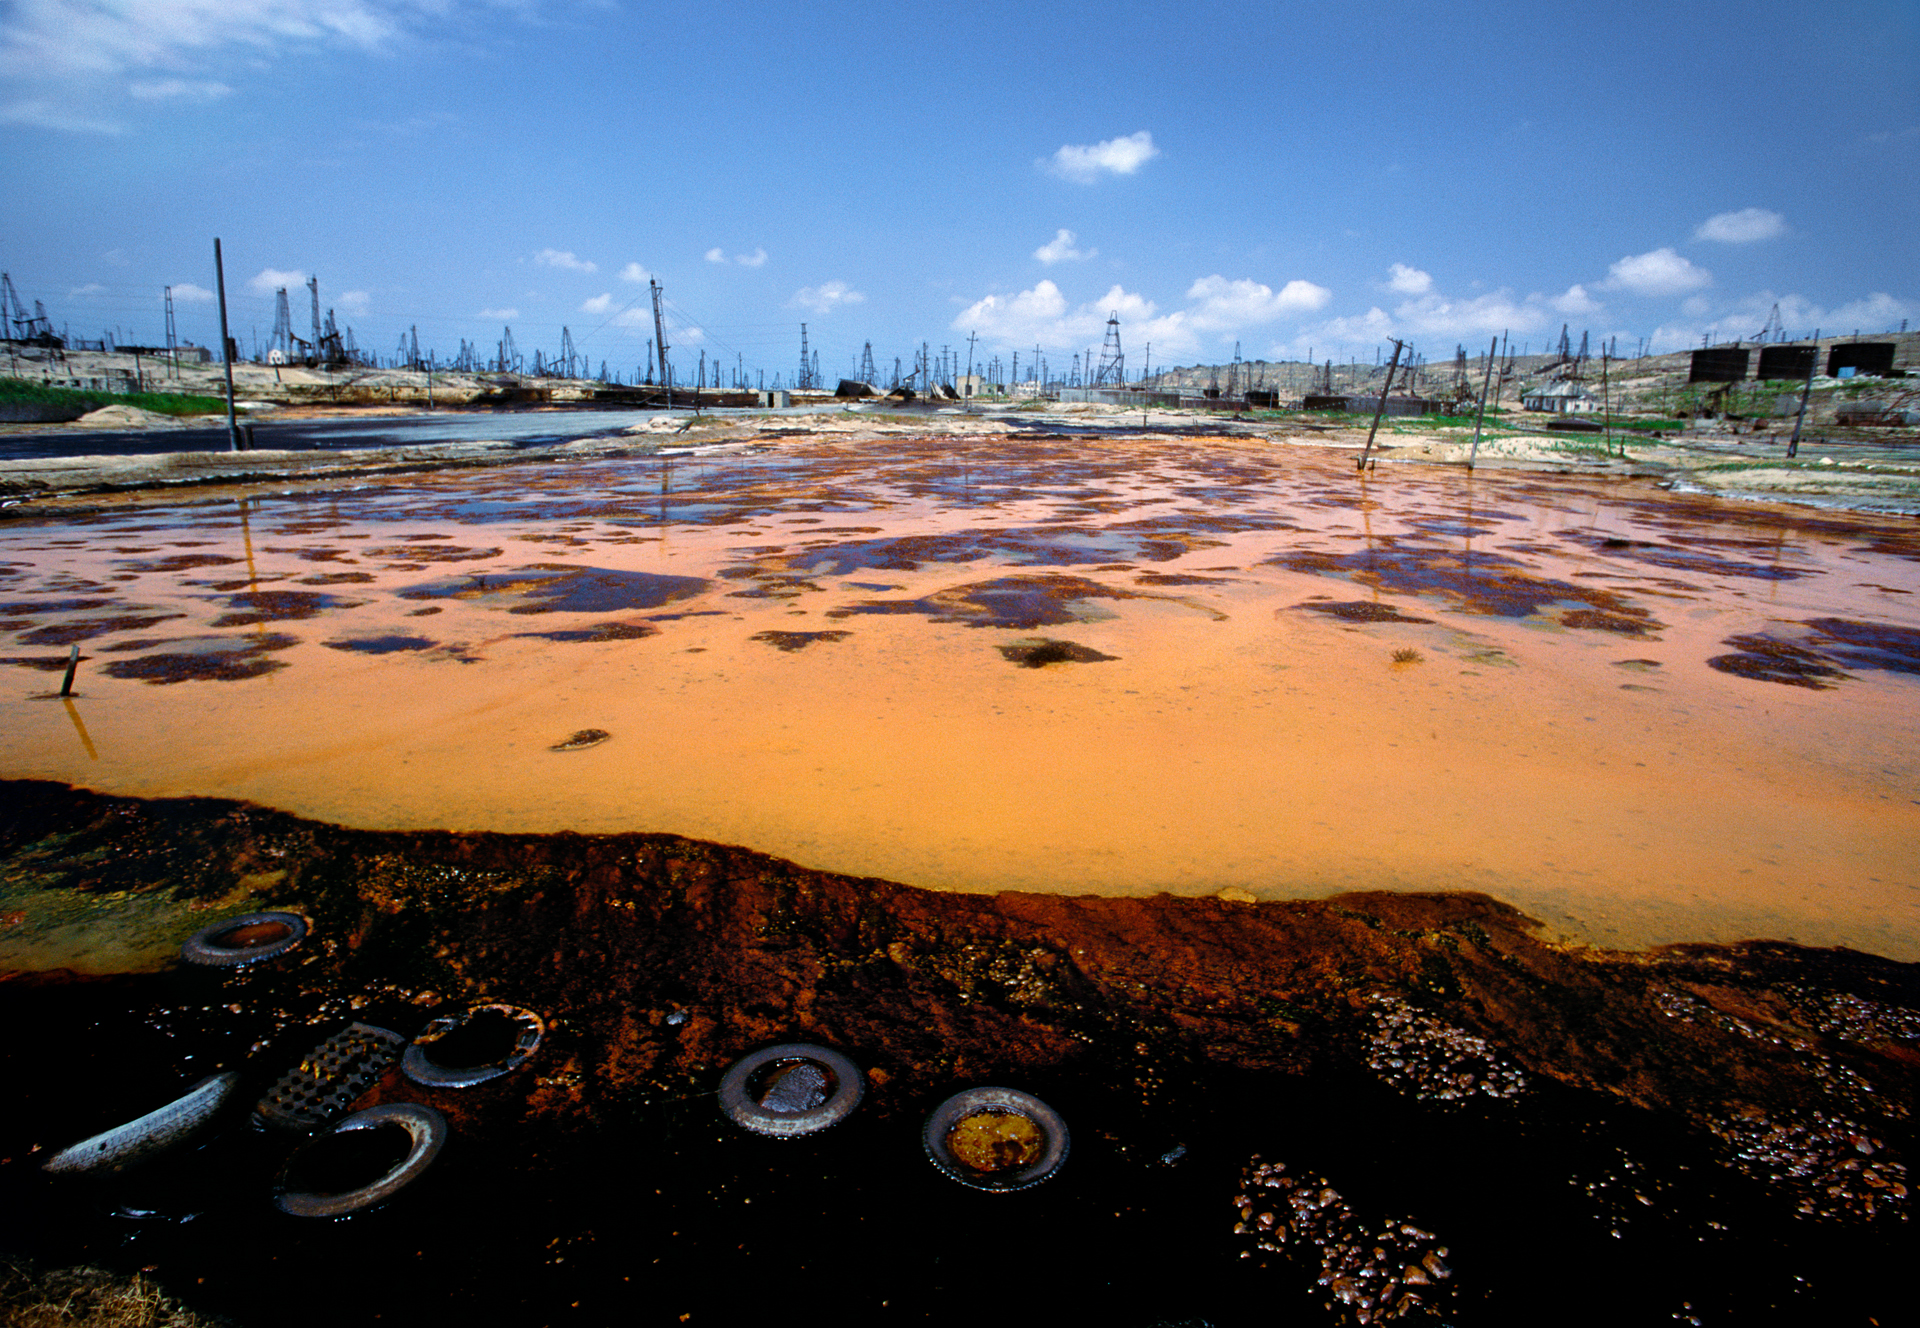  A gloss of oil and chemicals sheens standing water in an oil field near Baku. Runoff from the fields has rendered local streams, lakes and ponds biologically dead.  Baku, Azerbaijan  